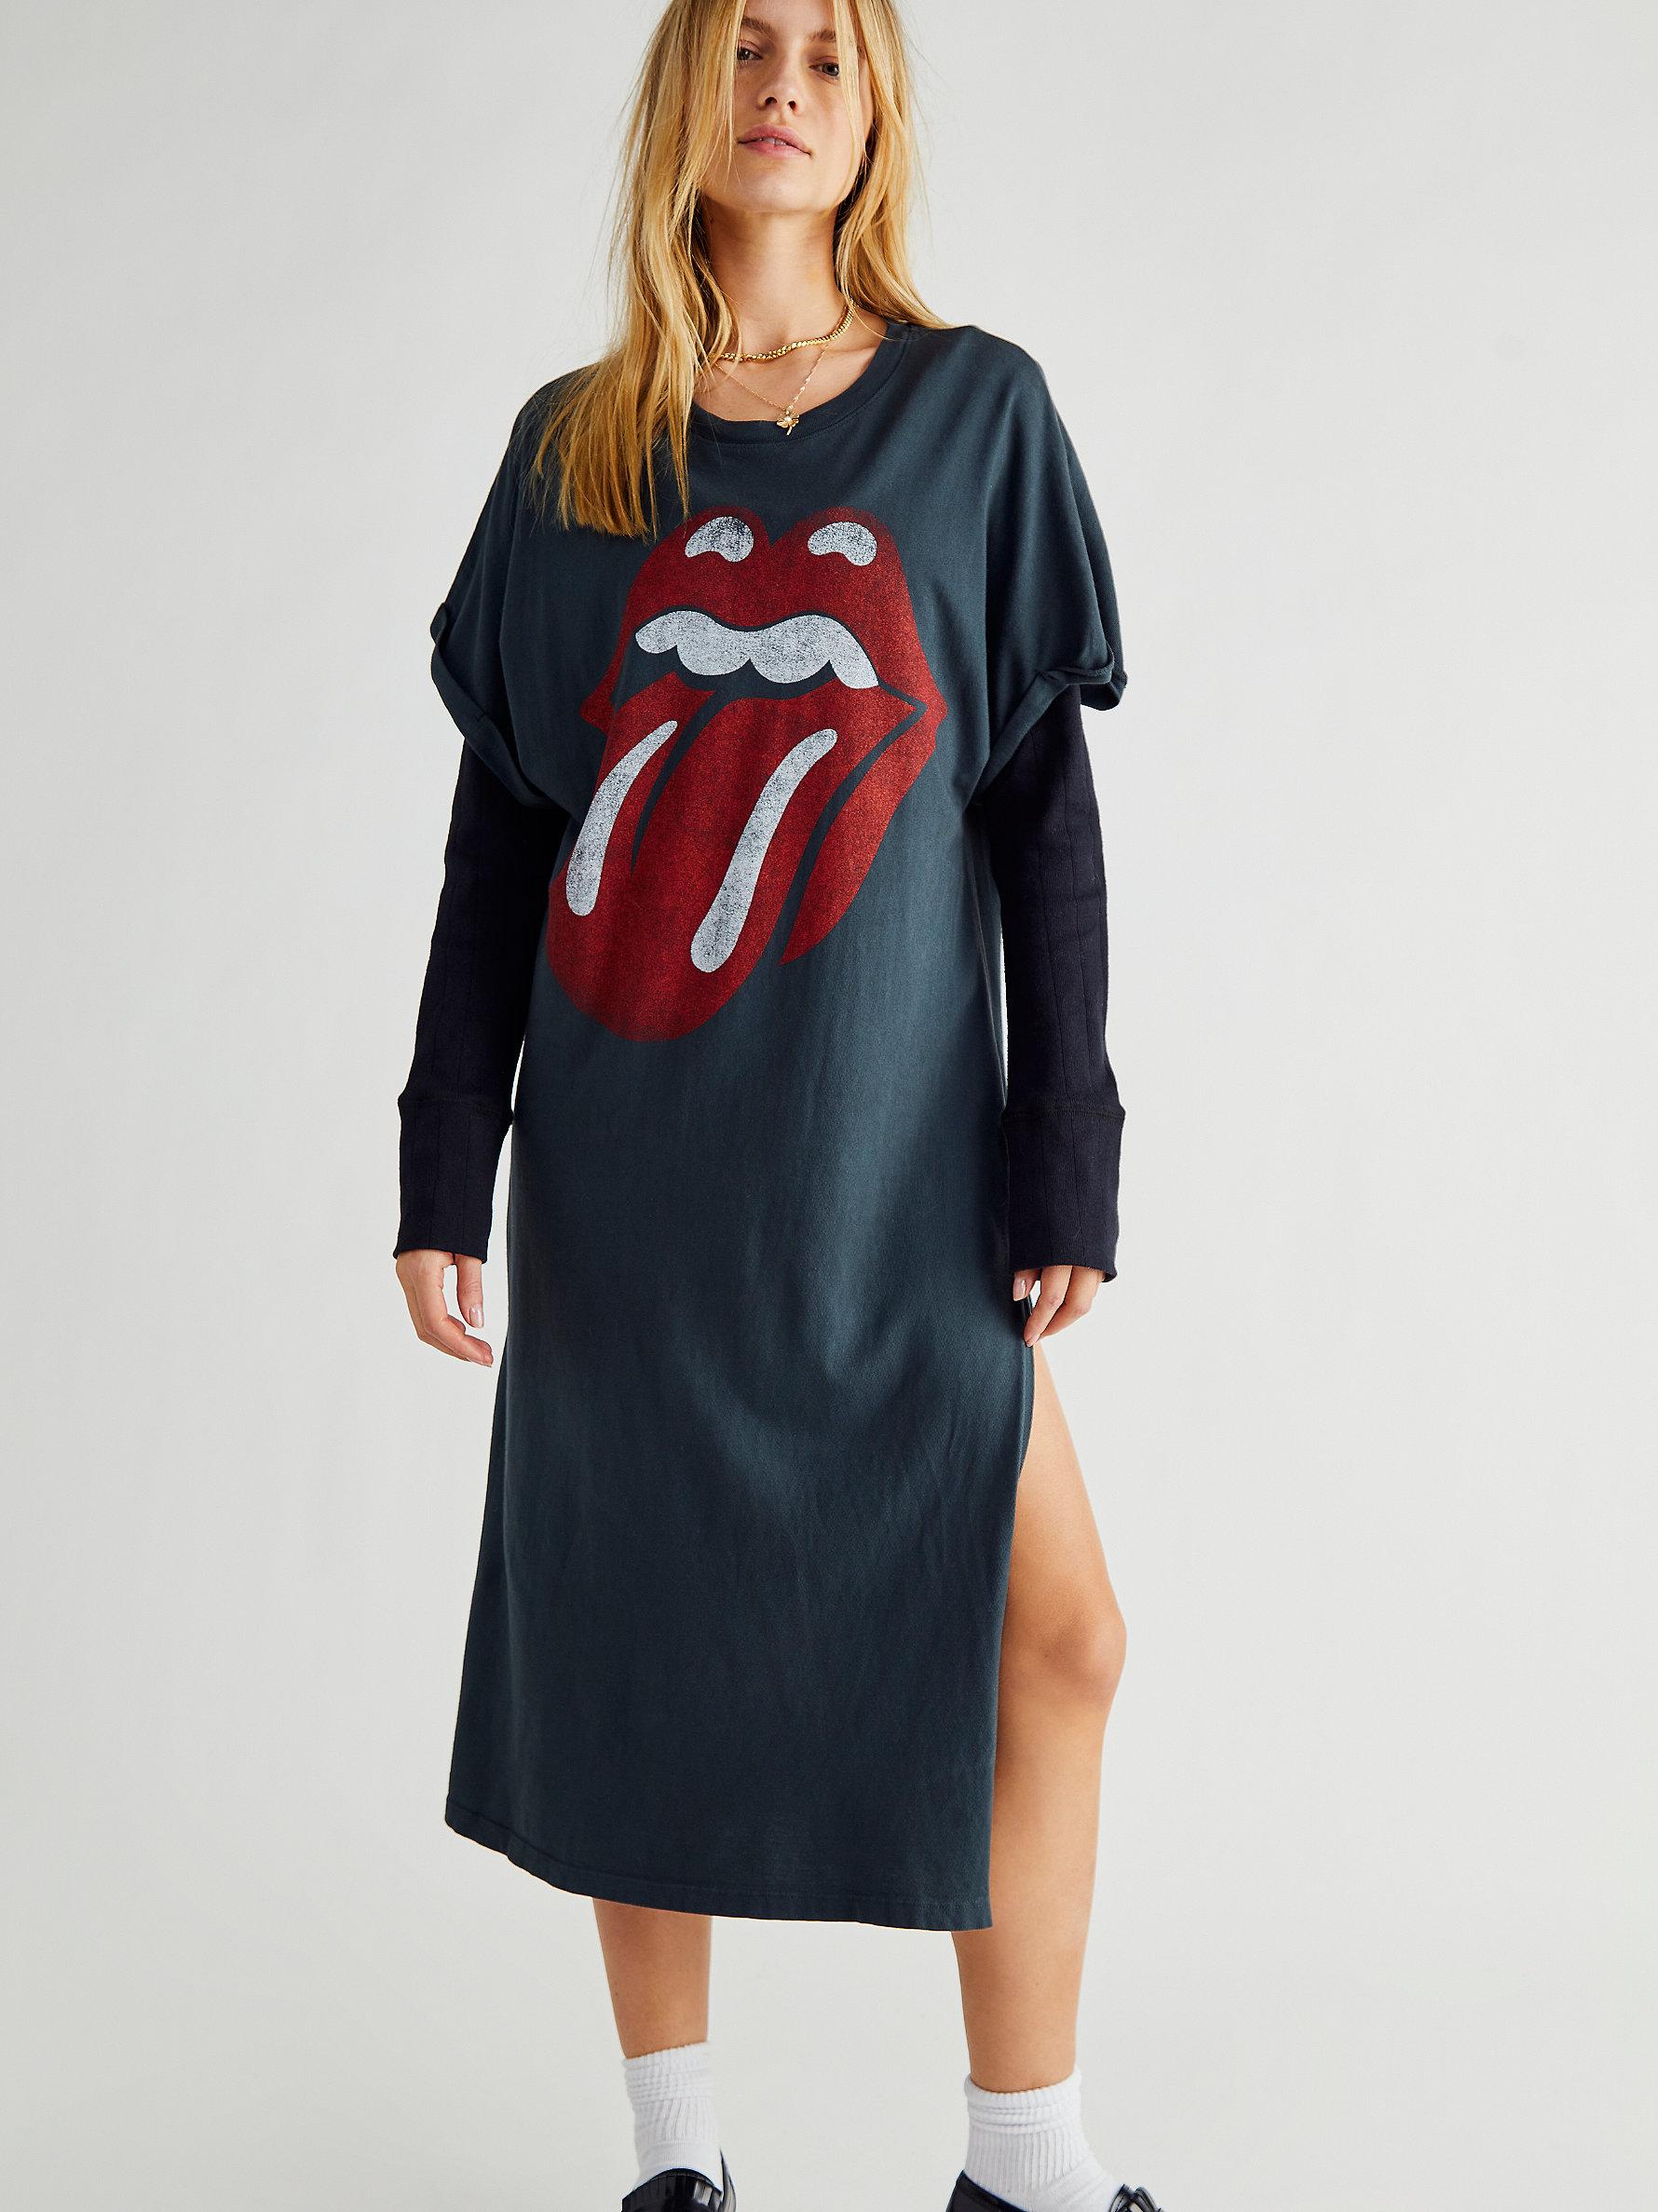 Free People Rolling Stones 89 Rolled Sleeve Maxi Top in Black | Lyst